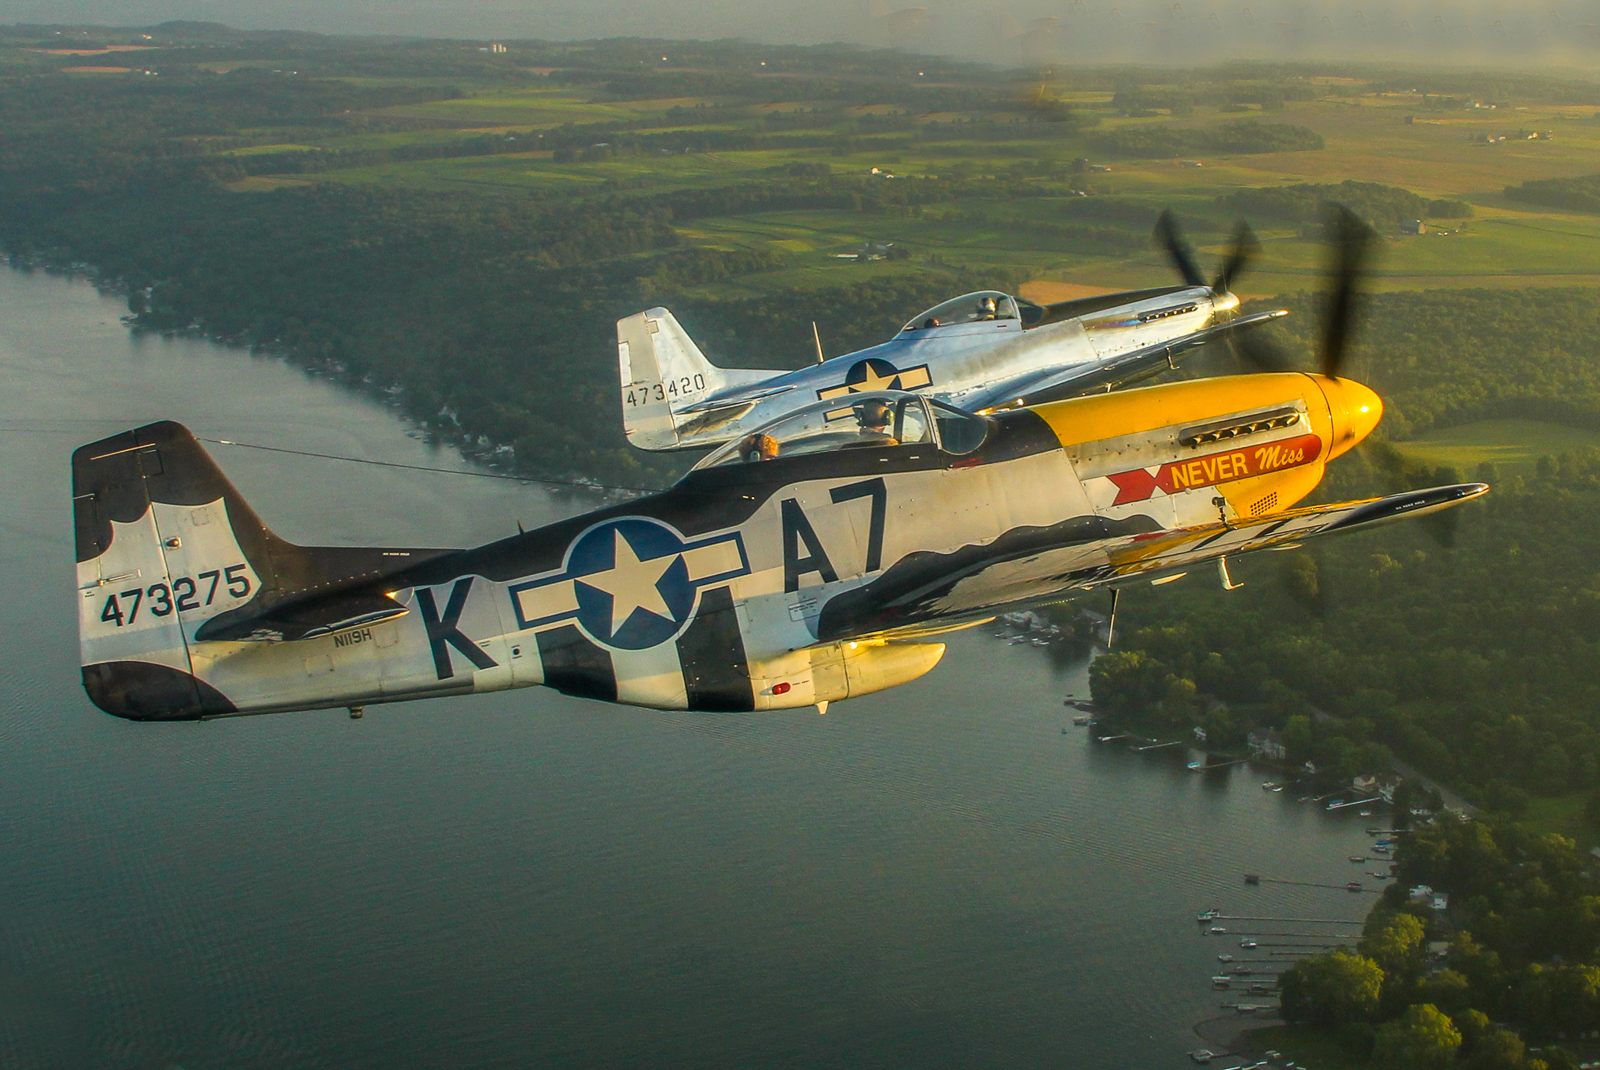 A stunning air-to-air of Mustangs over the Genesee Valley with Mark Murphy flying 'Never Miss' and Andrew McKenna in his factory-fresh P-51D. (photo by Tom Pawlesh)